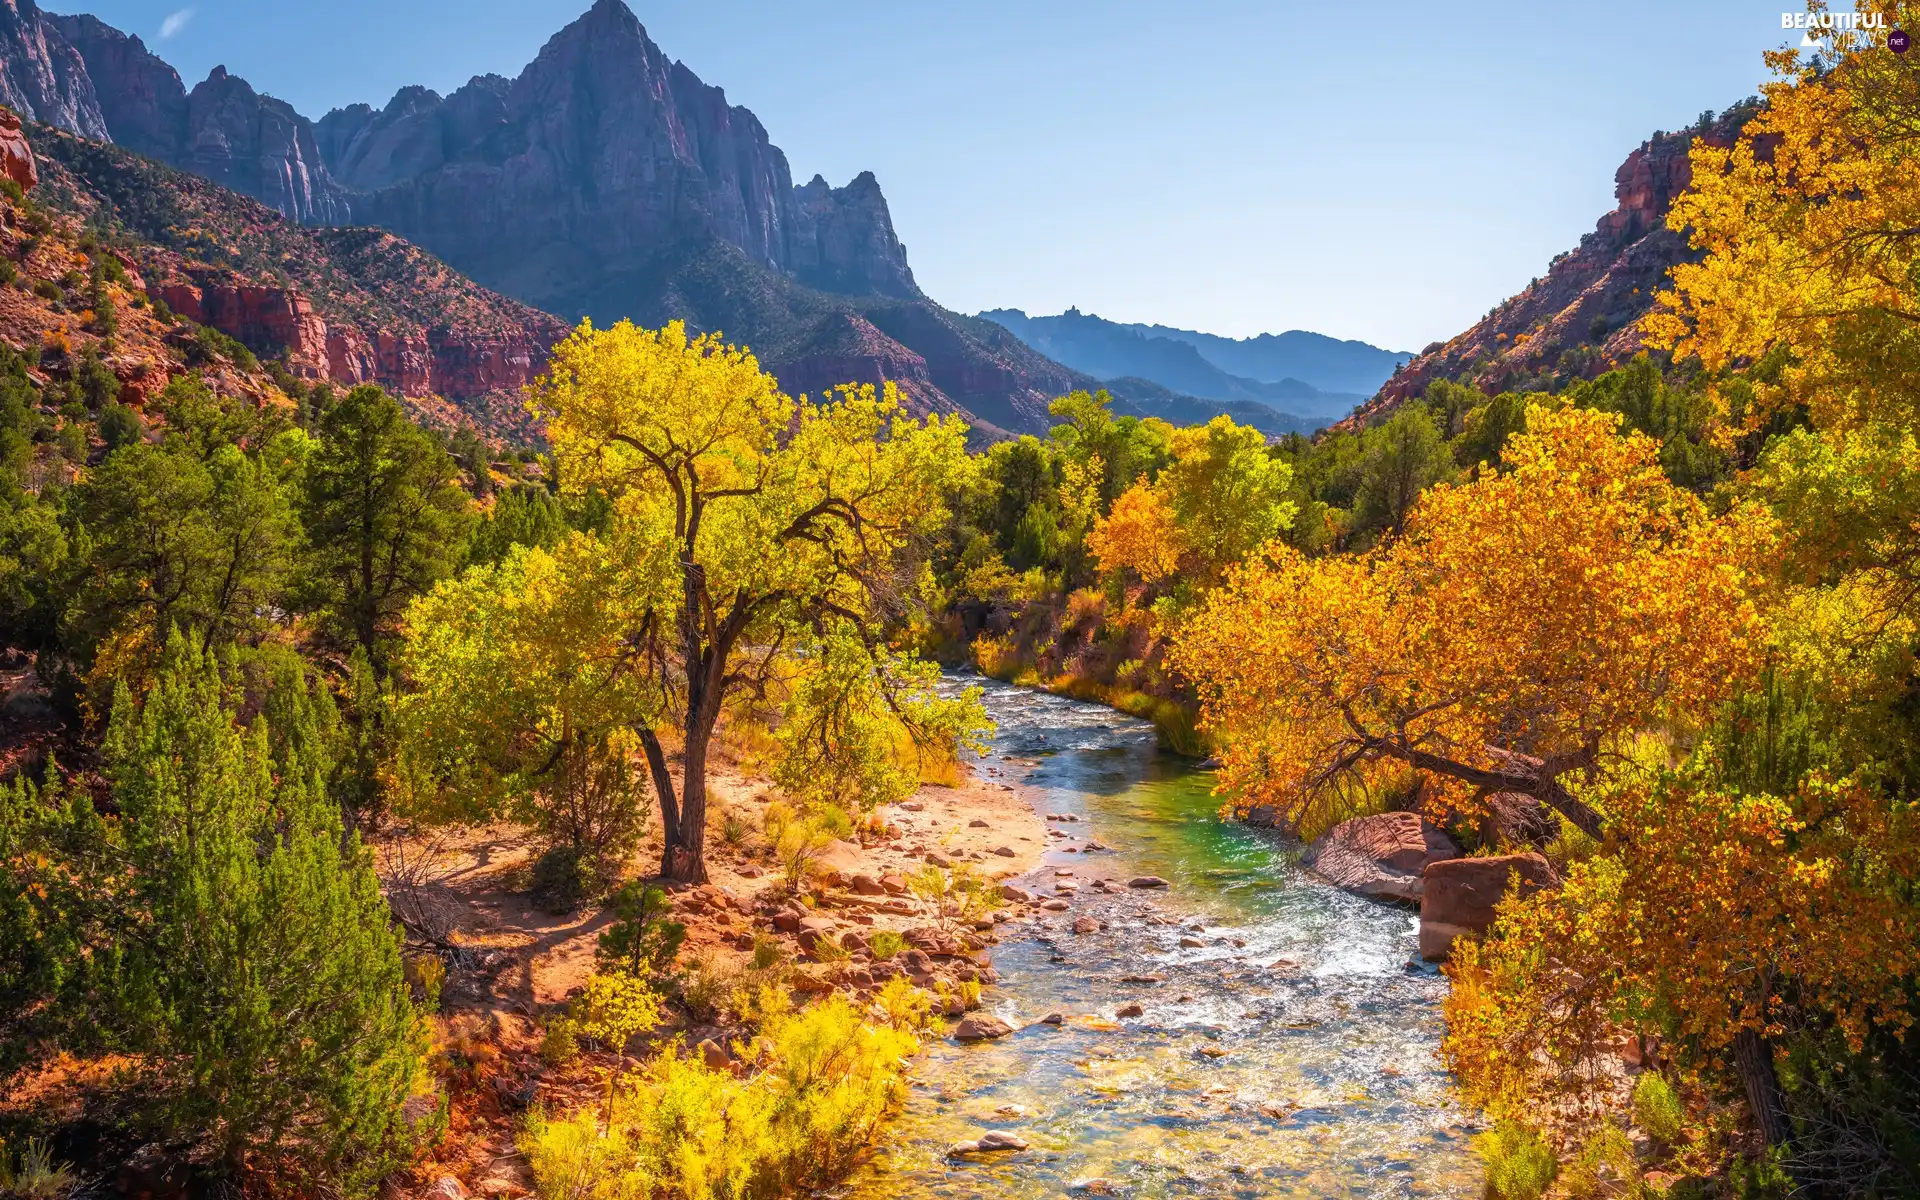 Watchman Mountains, Zion National Park, Virgin River, Stones, Utah State, The United States, viewes, autumn, trees